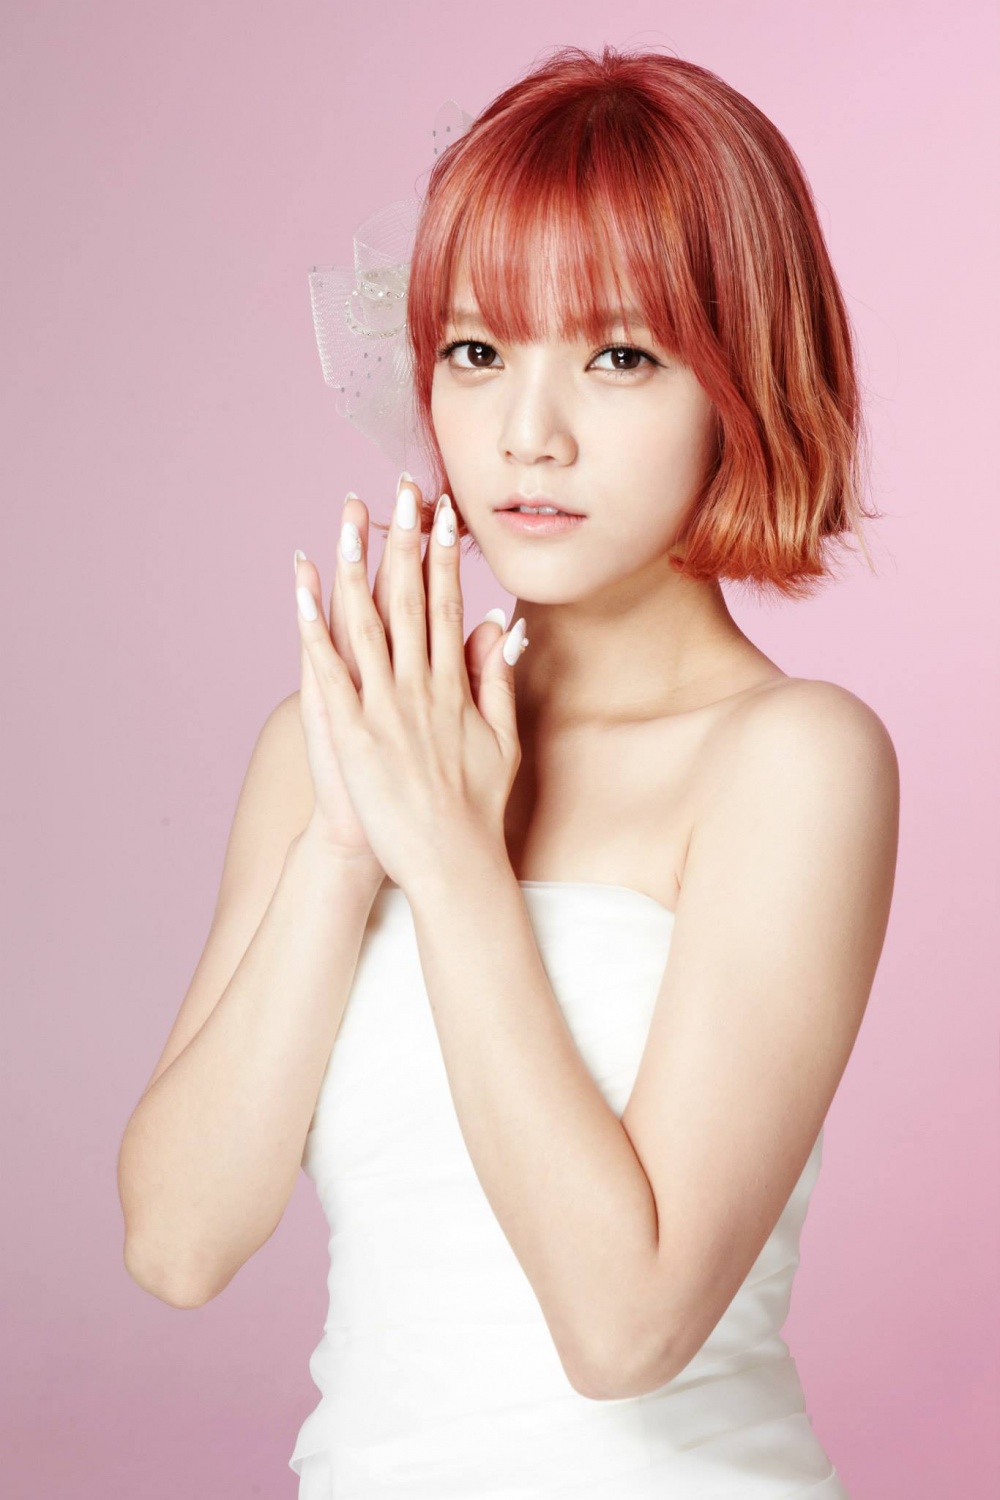 Acquaintances Of Former Aoa Member Jimin Give Update About Her Following Her Departure Kpopstarz